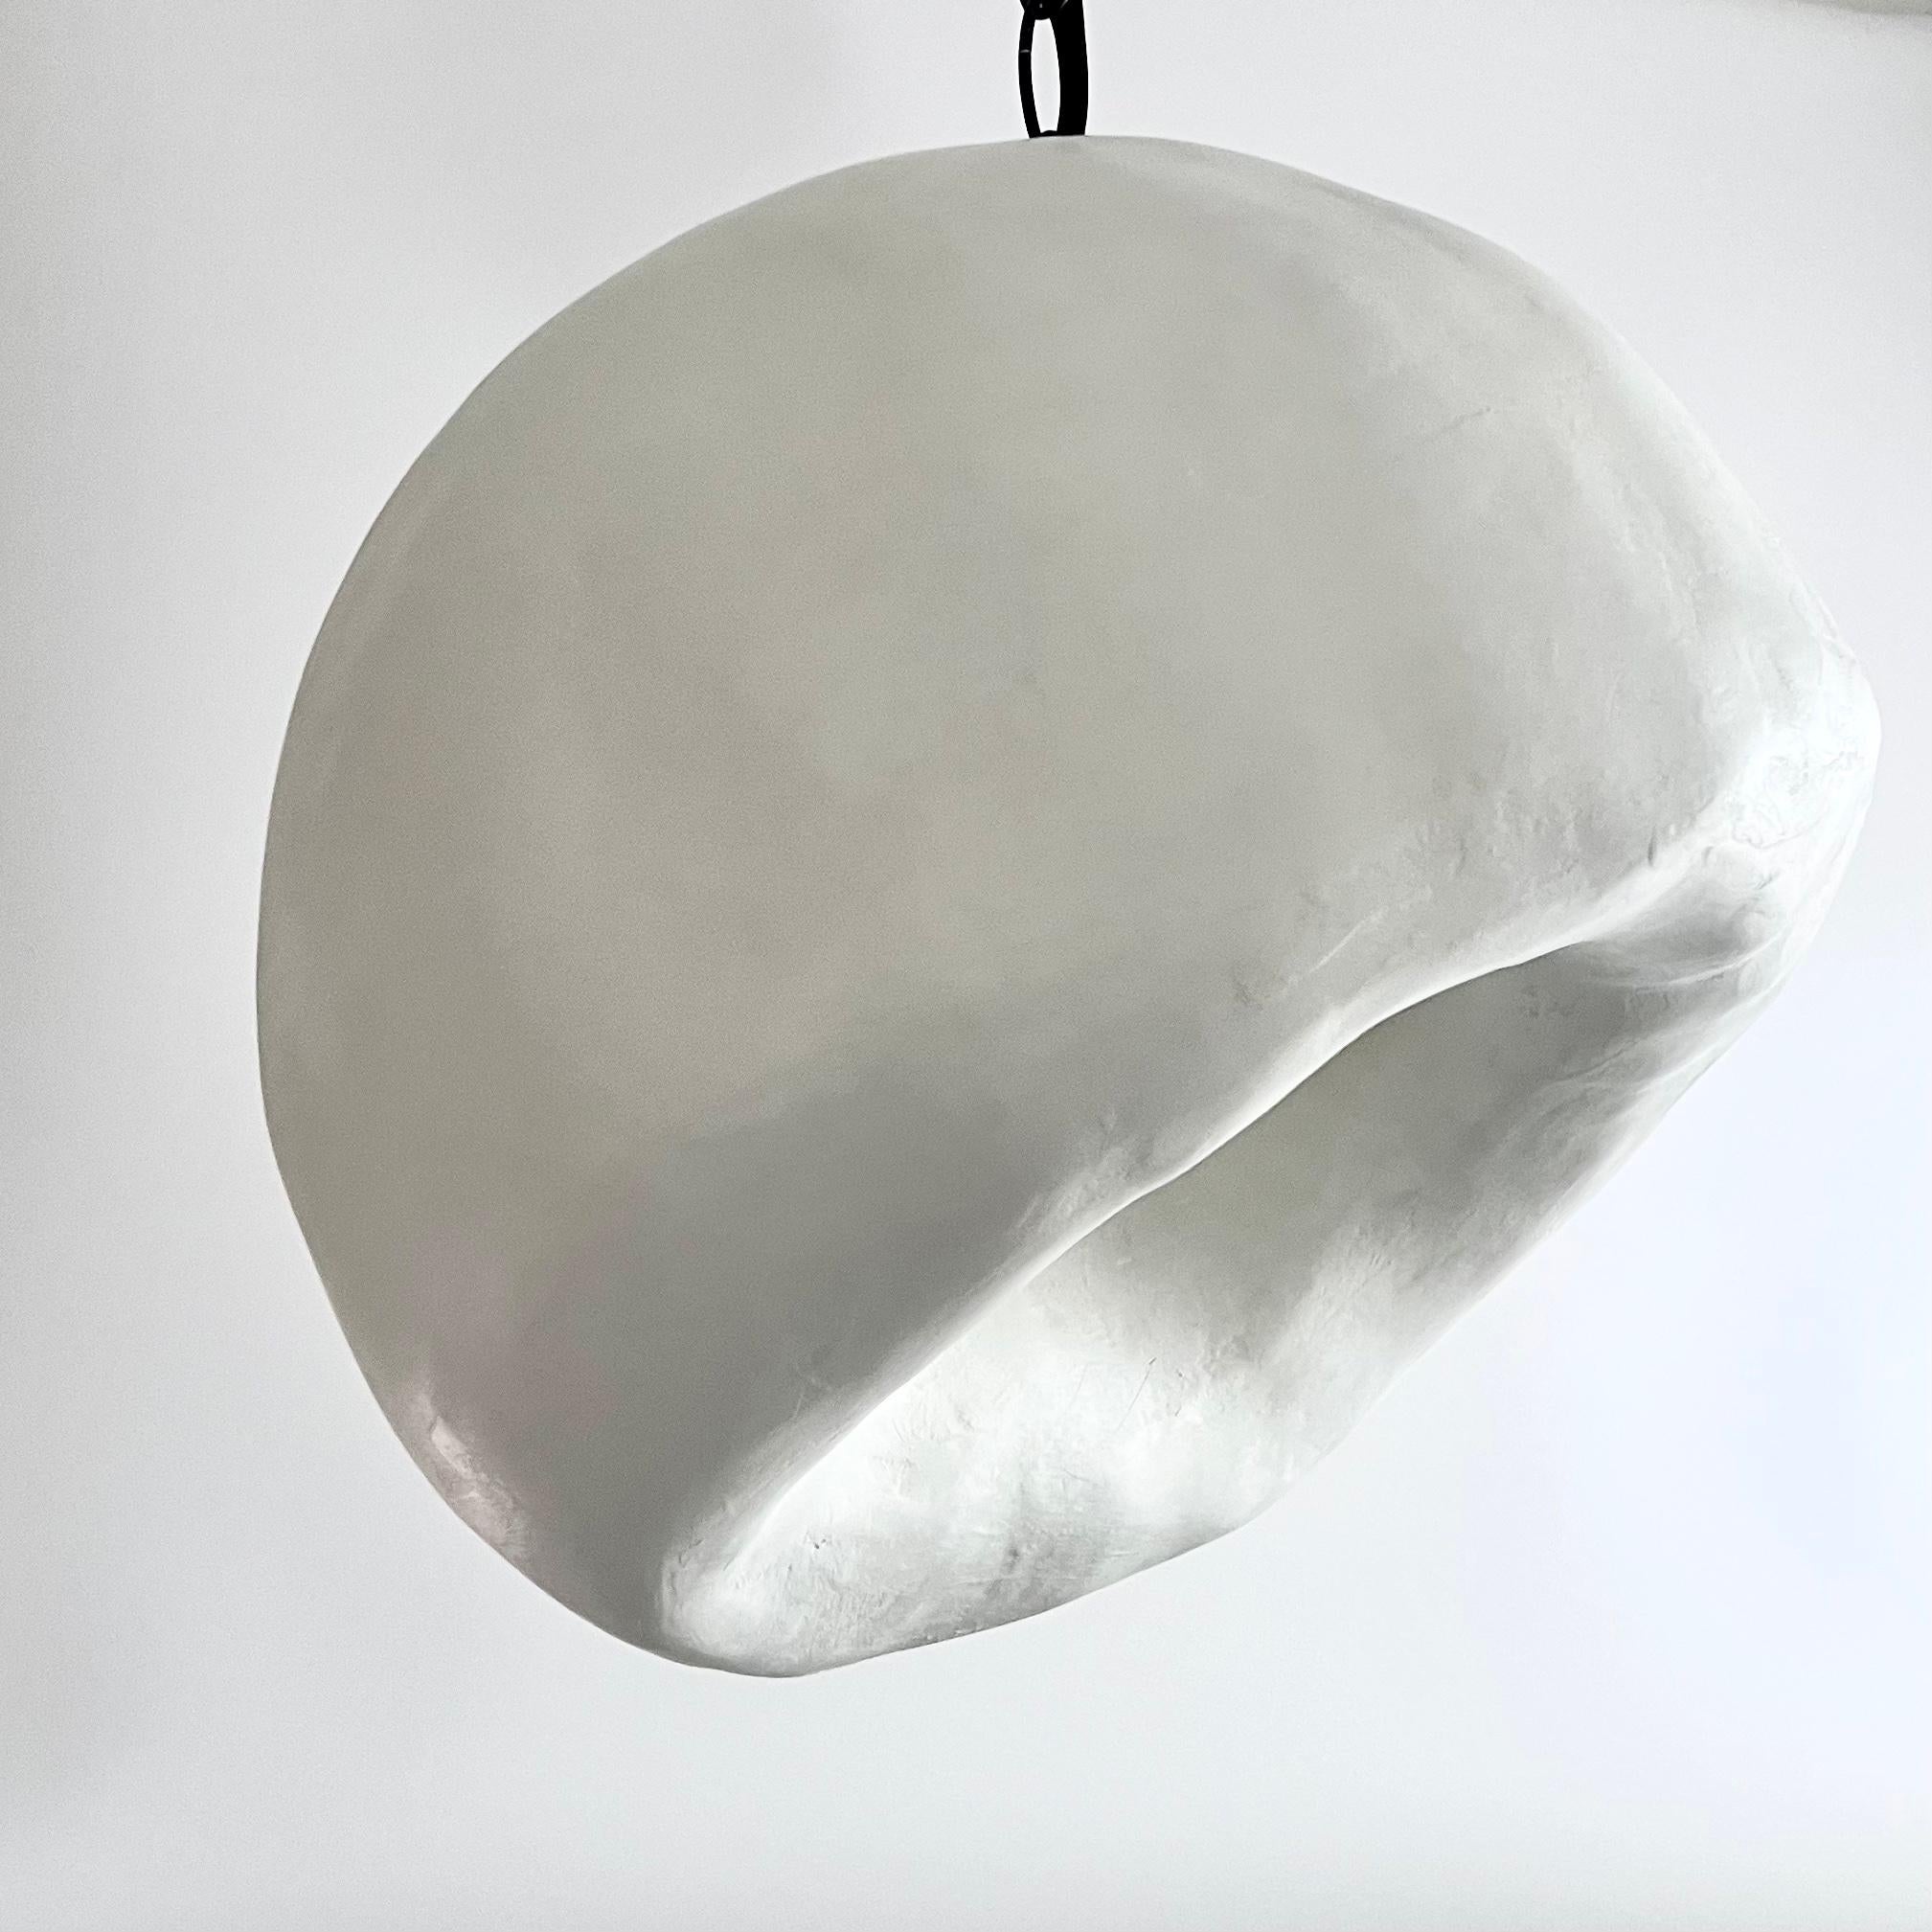 Hanging pendant light fixture by Studio Chora, Biomorphic Series. Hardwired. Current production and made-to-order. 3-4 week lead time. Biomorphic: ‘bios' meaning life and 'morphe' meaning form.

Dimensions (as shown): 
diameter: 1'-0